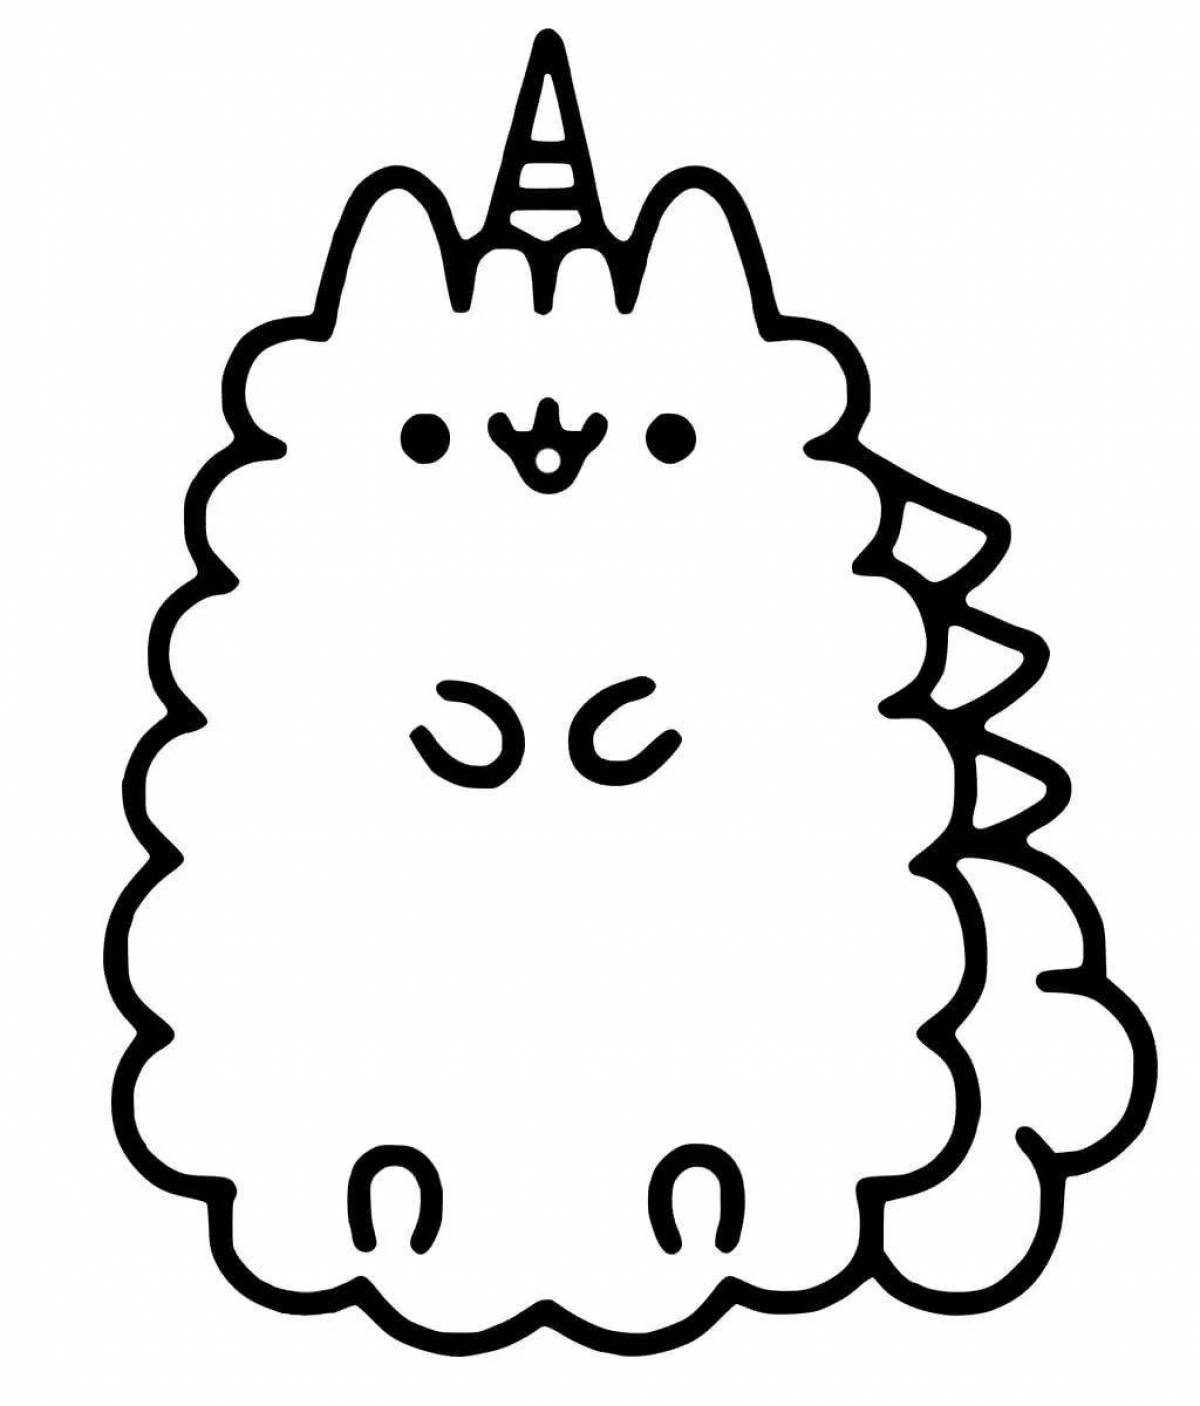 Plump cat coloring page